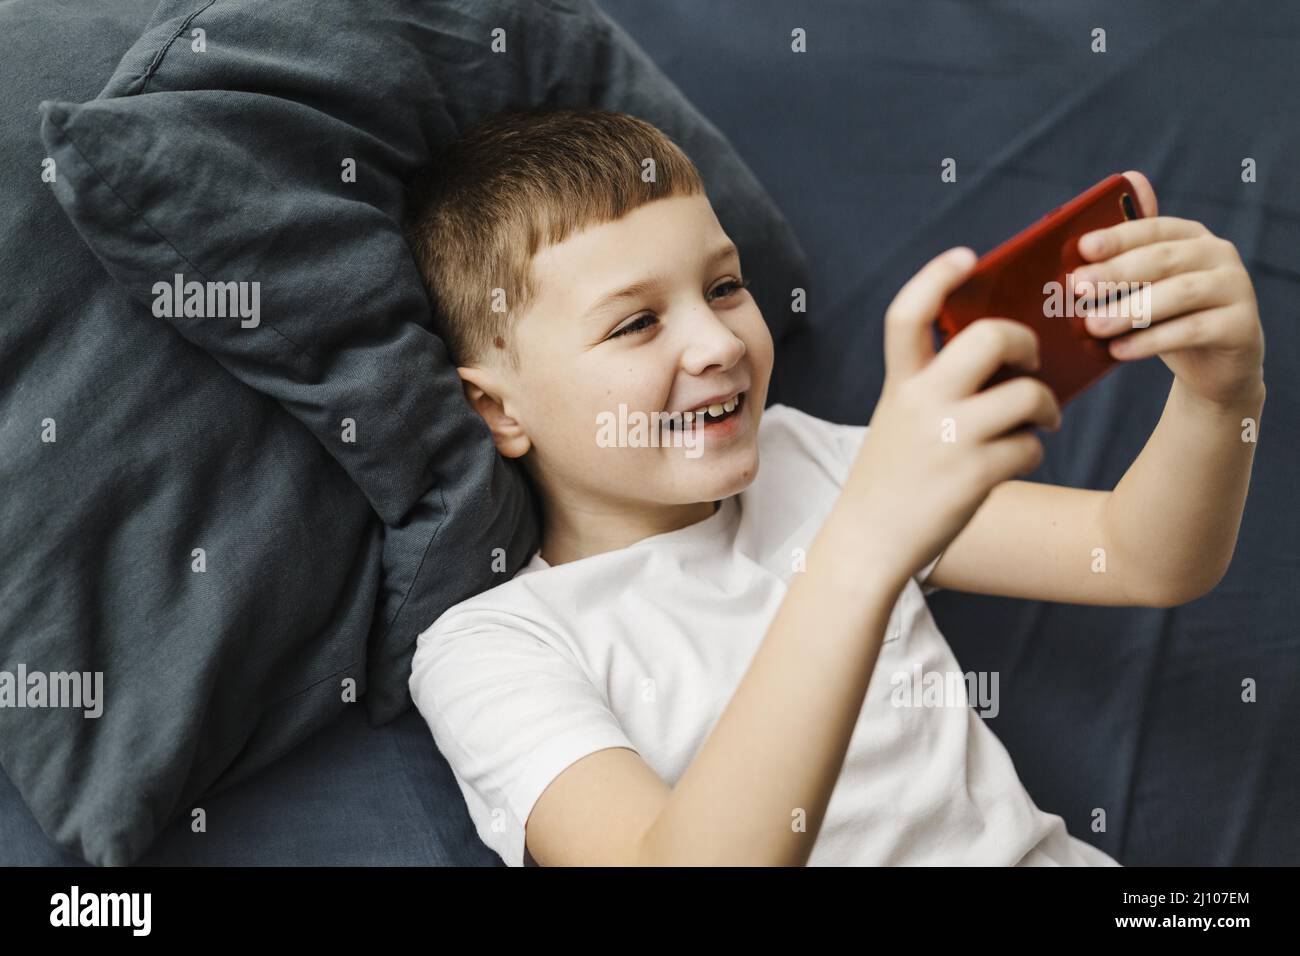 High view child playing mobile phone Stock Photo